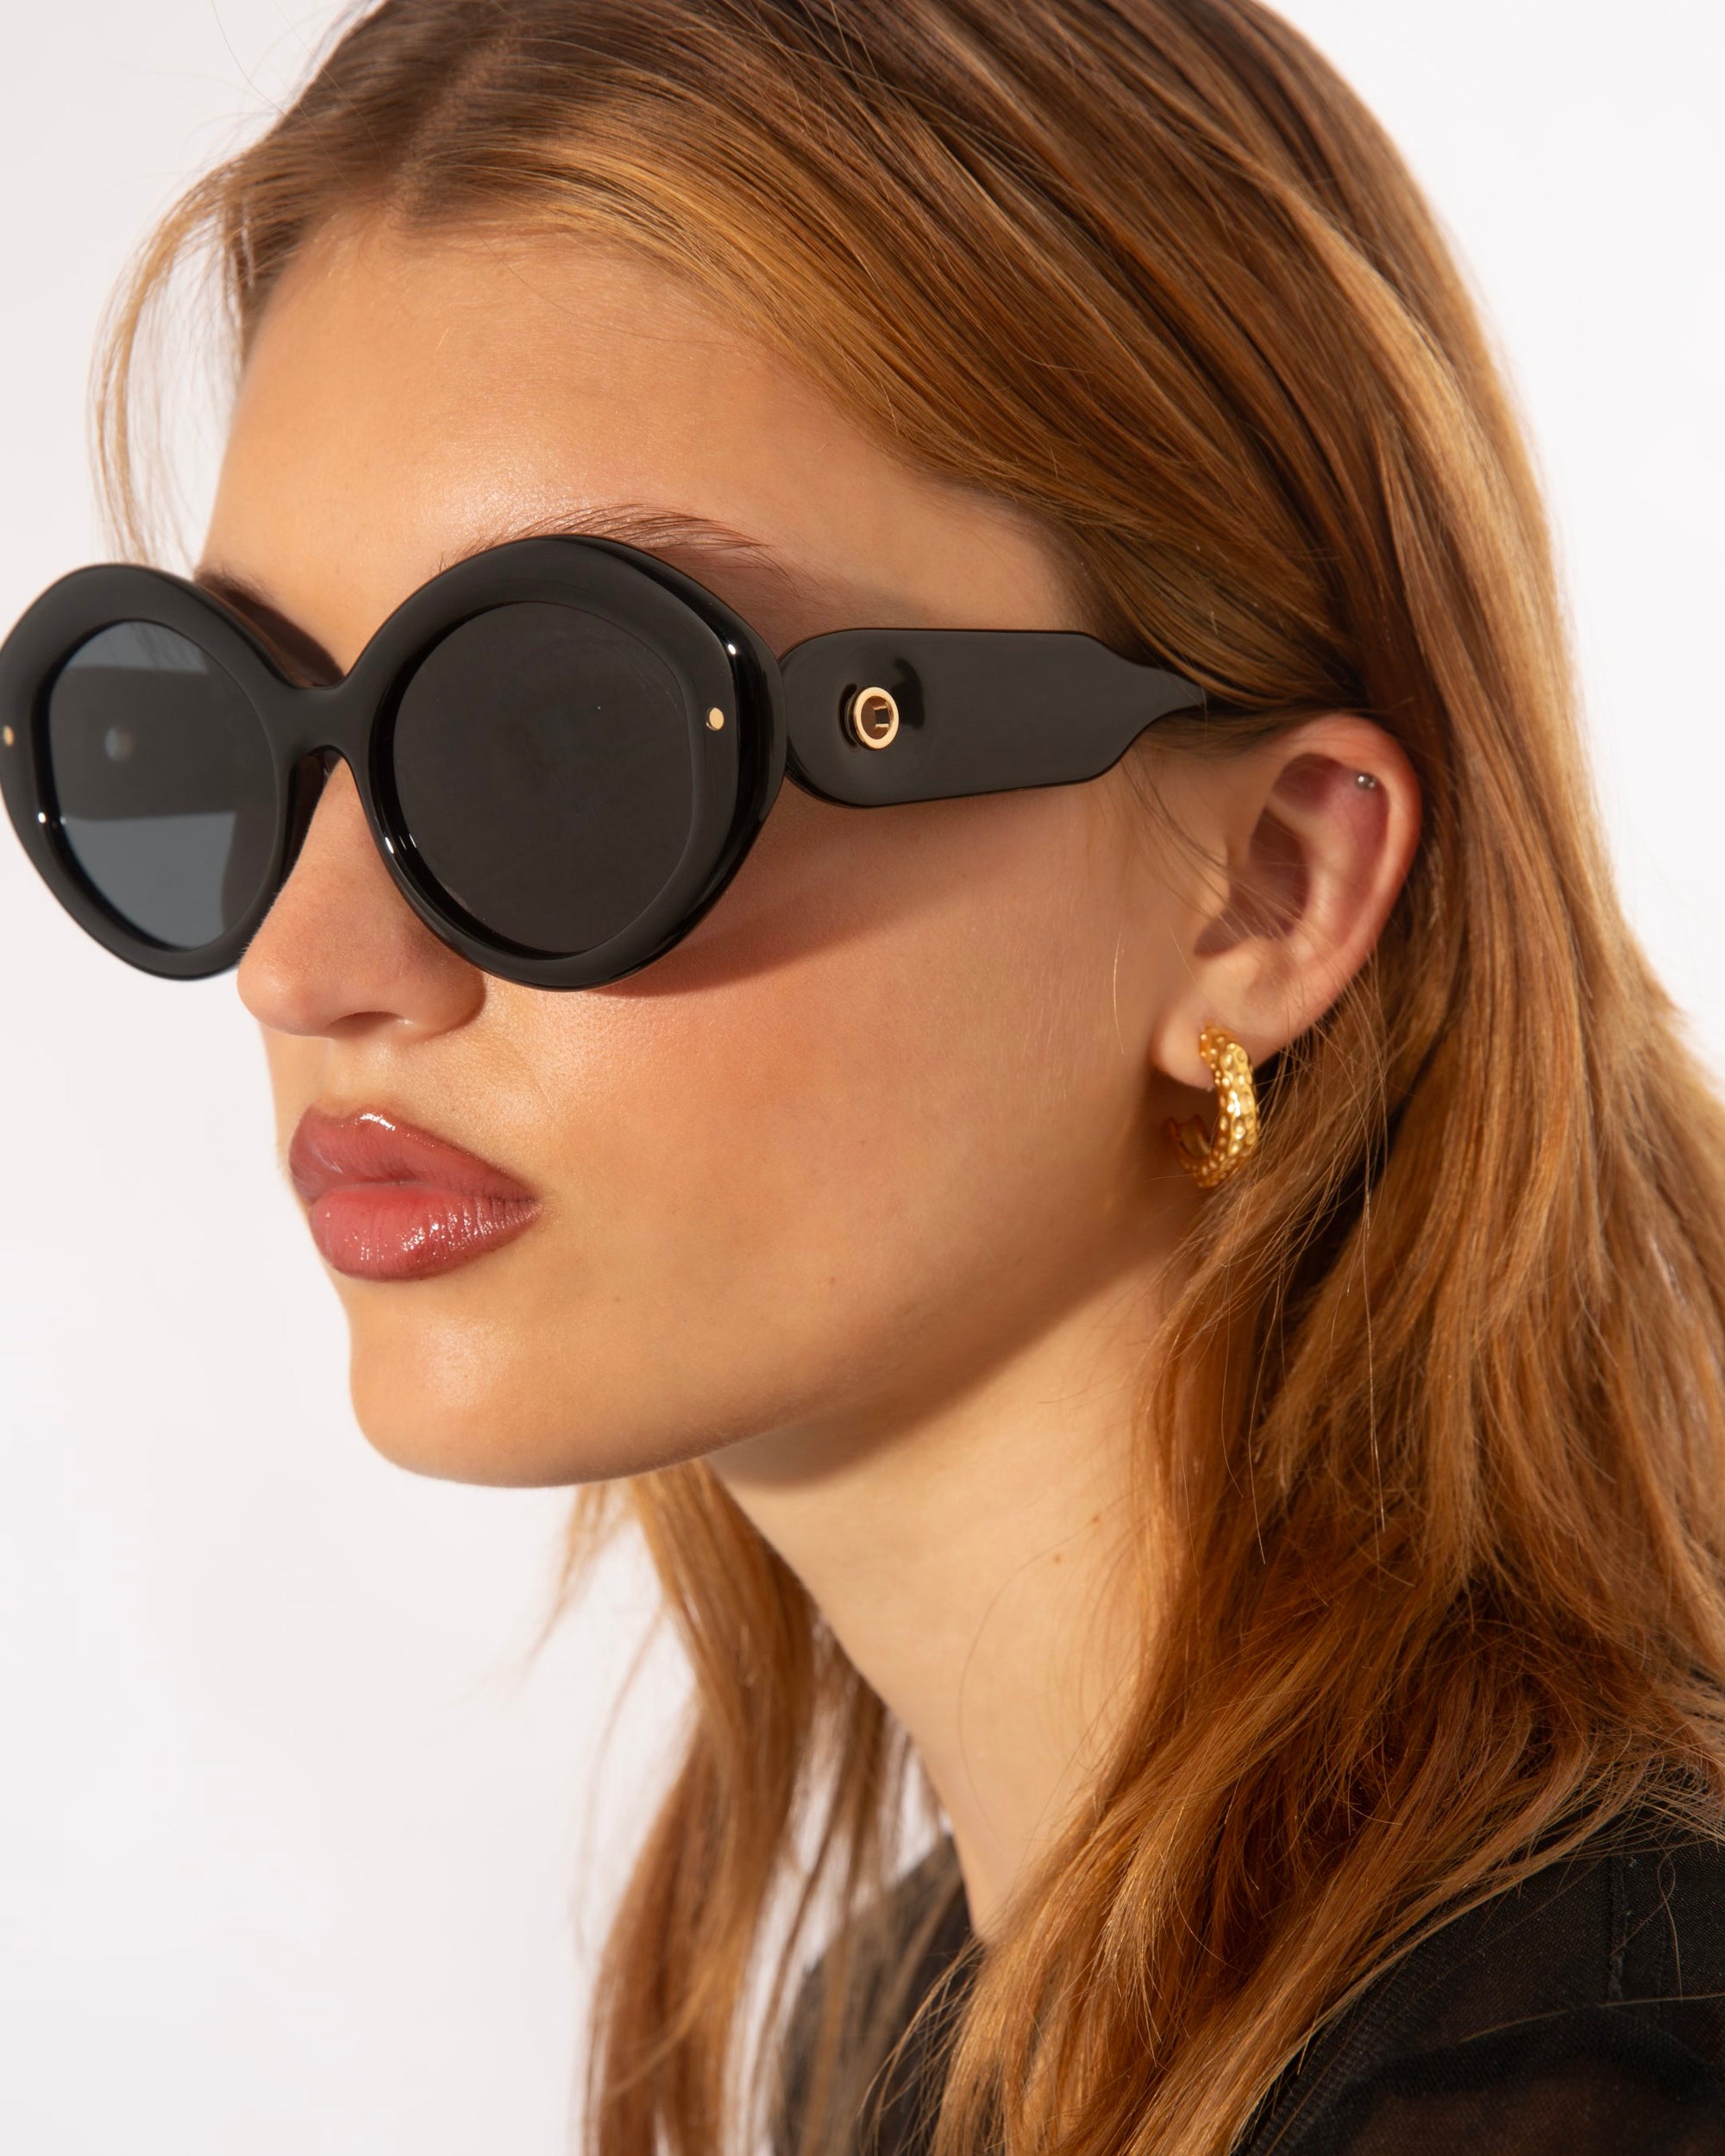 A person with long, light brown hair is wearing large, round black Helios sunglasses from For Art&#39;s Sake® and gold hoop earrings. The background is plain and light-colored, highlighting their luxury eyewear.